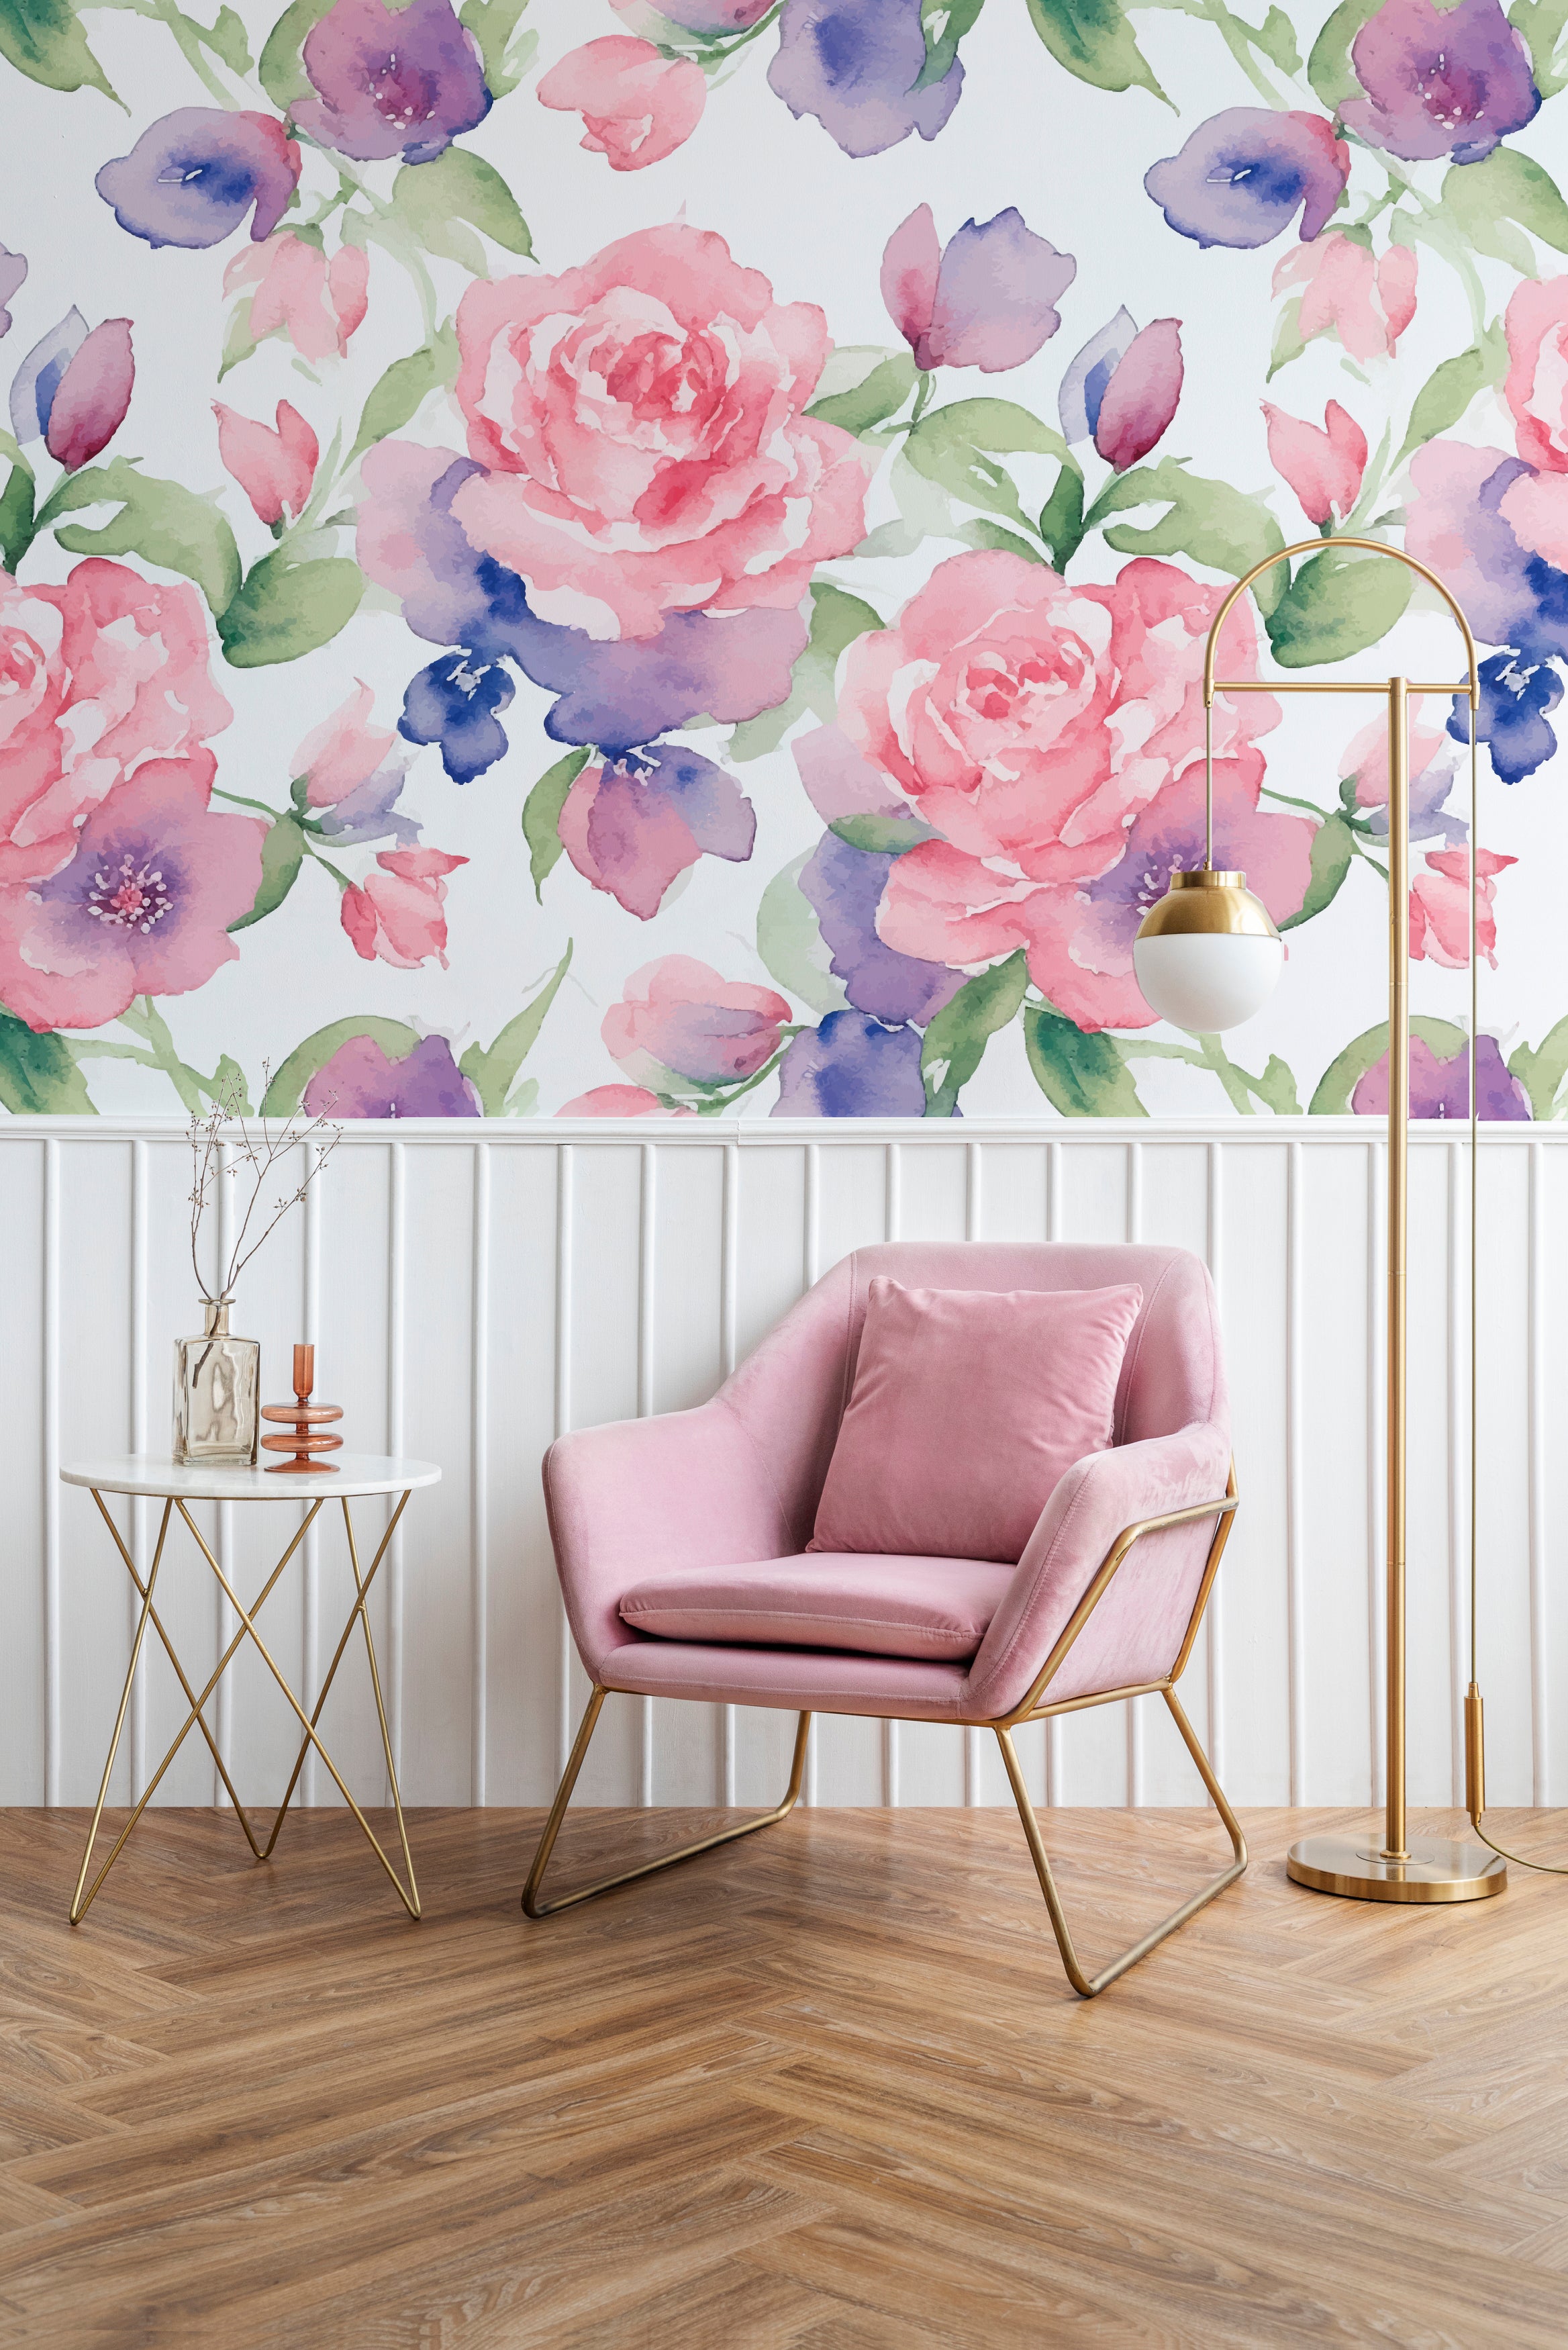 An elegant living area decorated with Mystic Garden Wallpaper, featuring large pink roses and subtle blue flowers. The room includes a plush pink armchair and a gold and white side table, creating a sophisticated and calming space perfect for relaxation